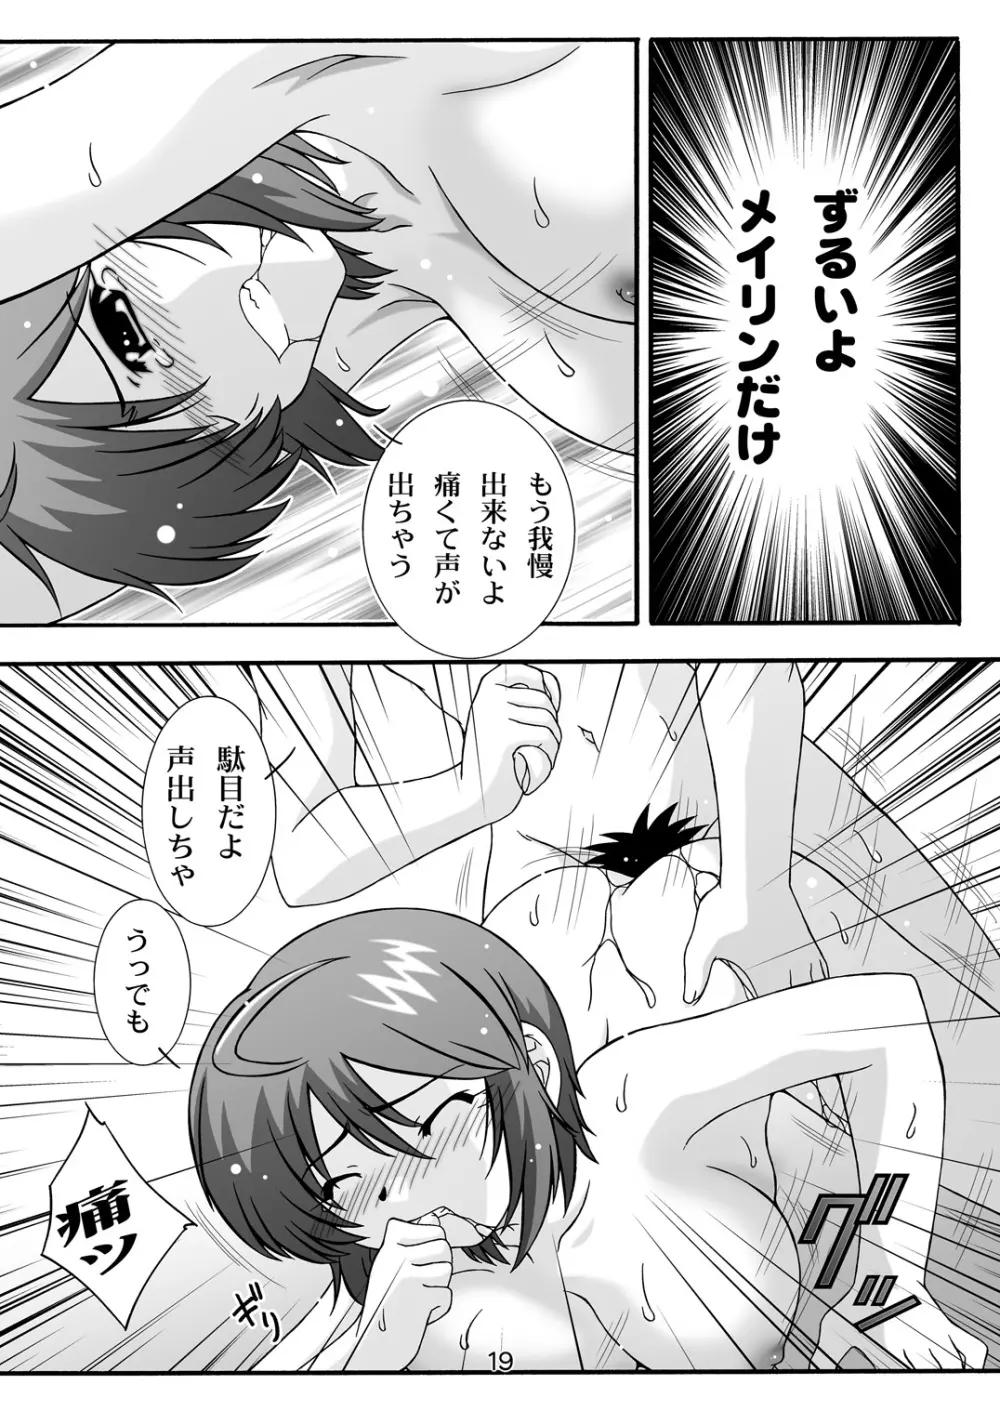 STAGE.1 ルナマリアの歌声 - page19